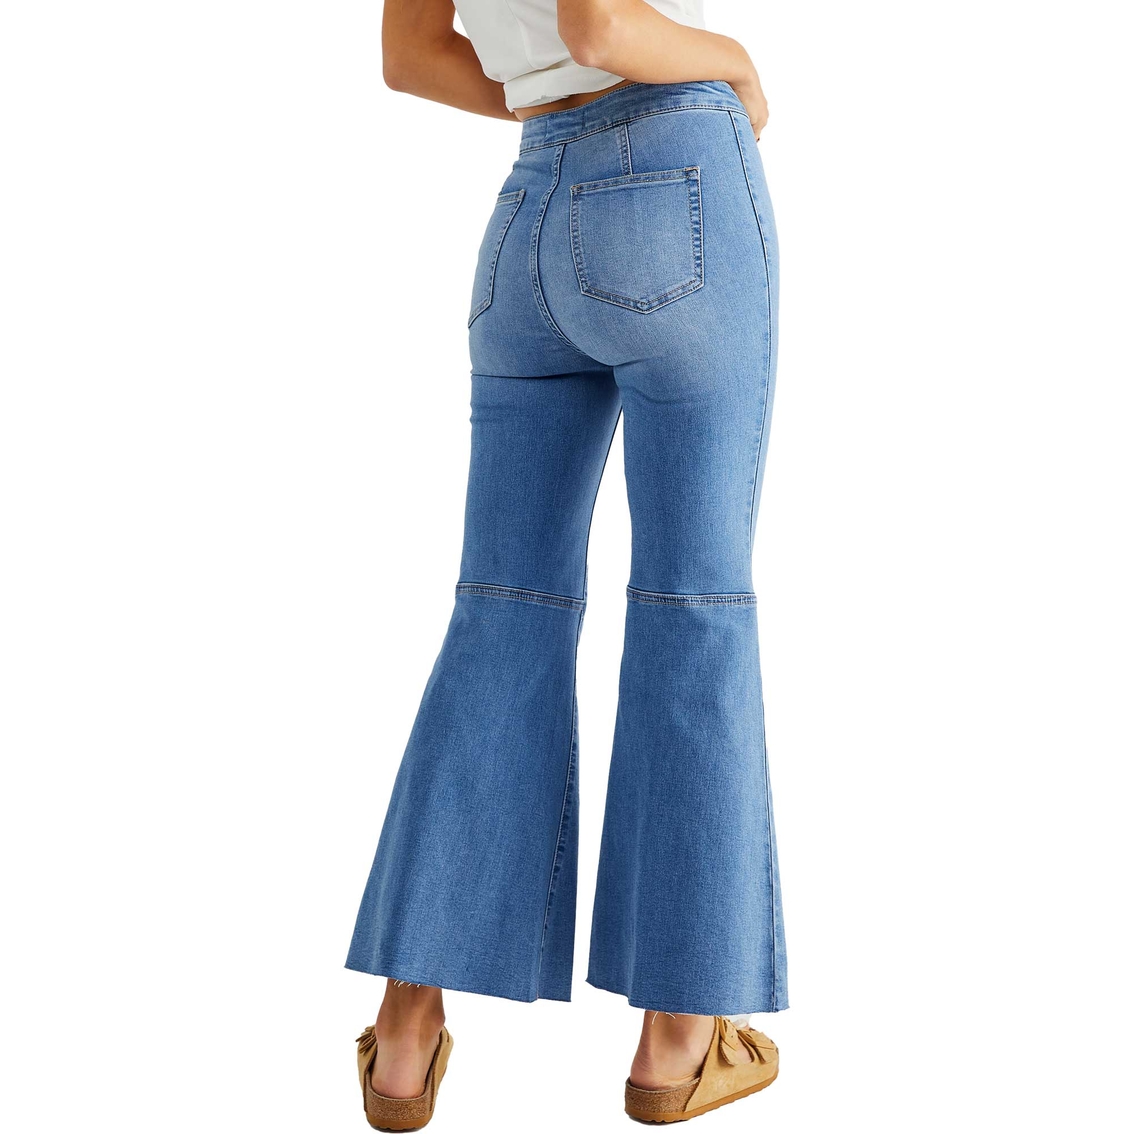 Free People Youthquake Crop Flare Jeans | Jeans | Clothing ...